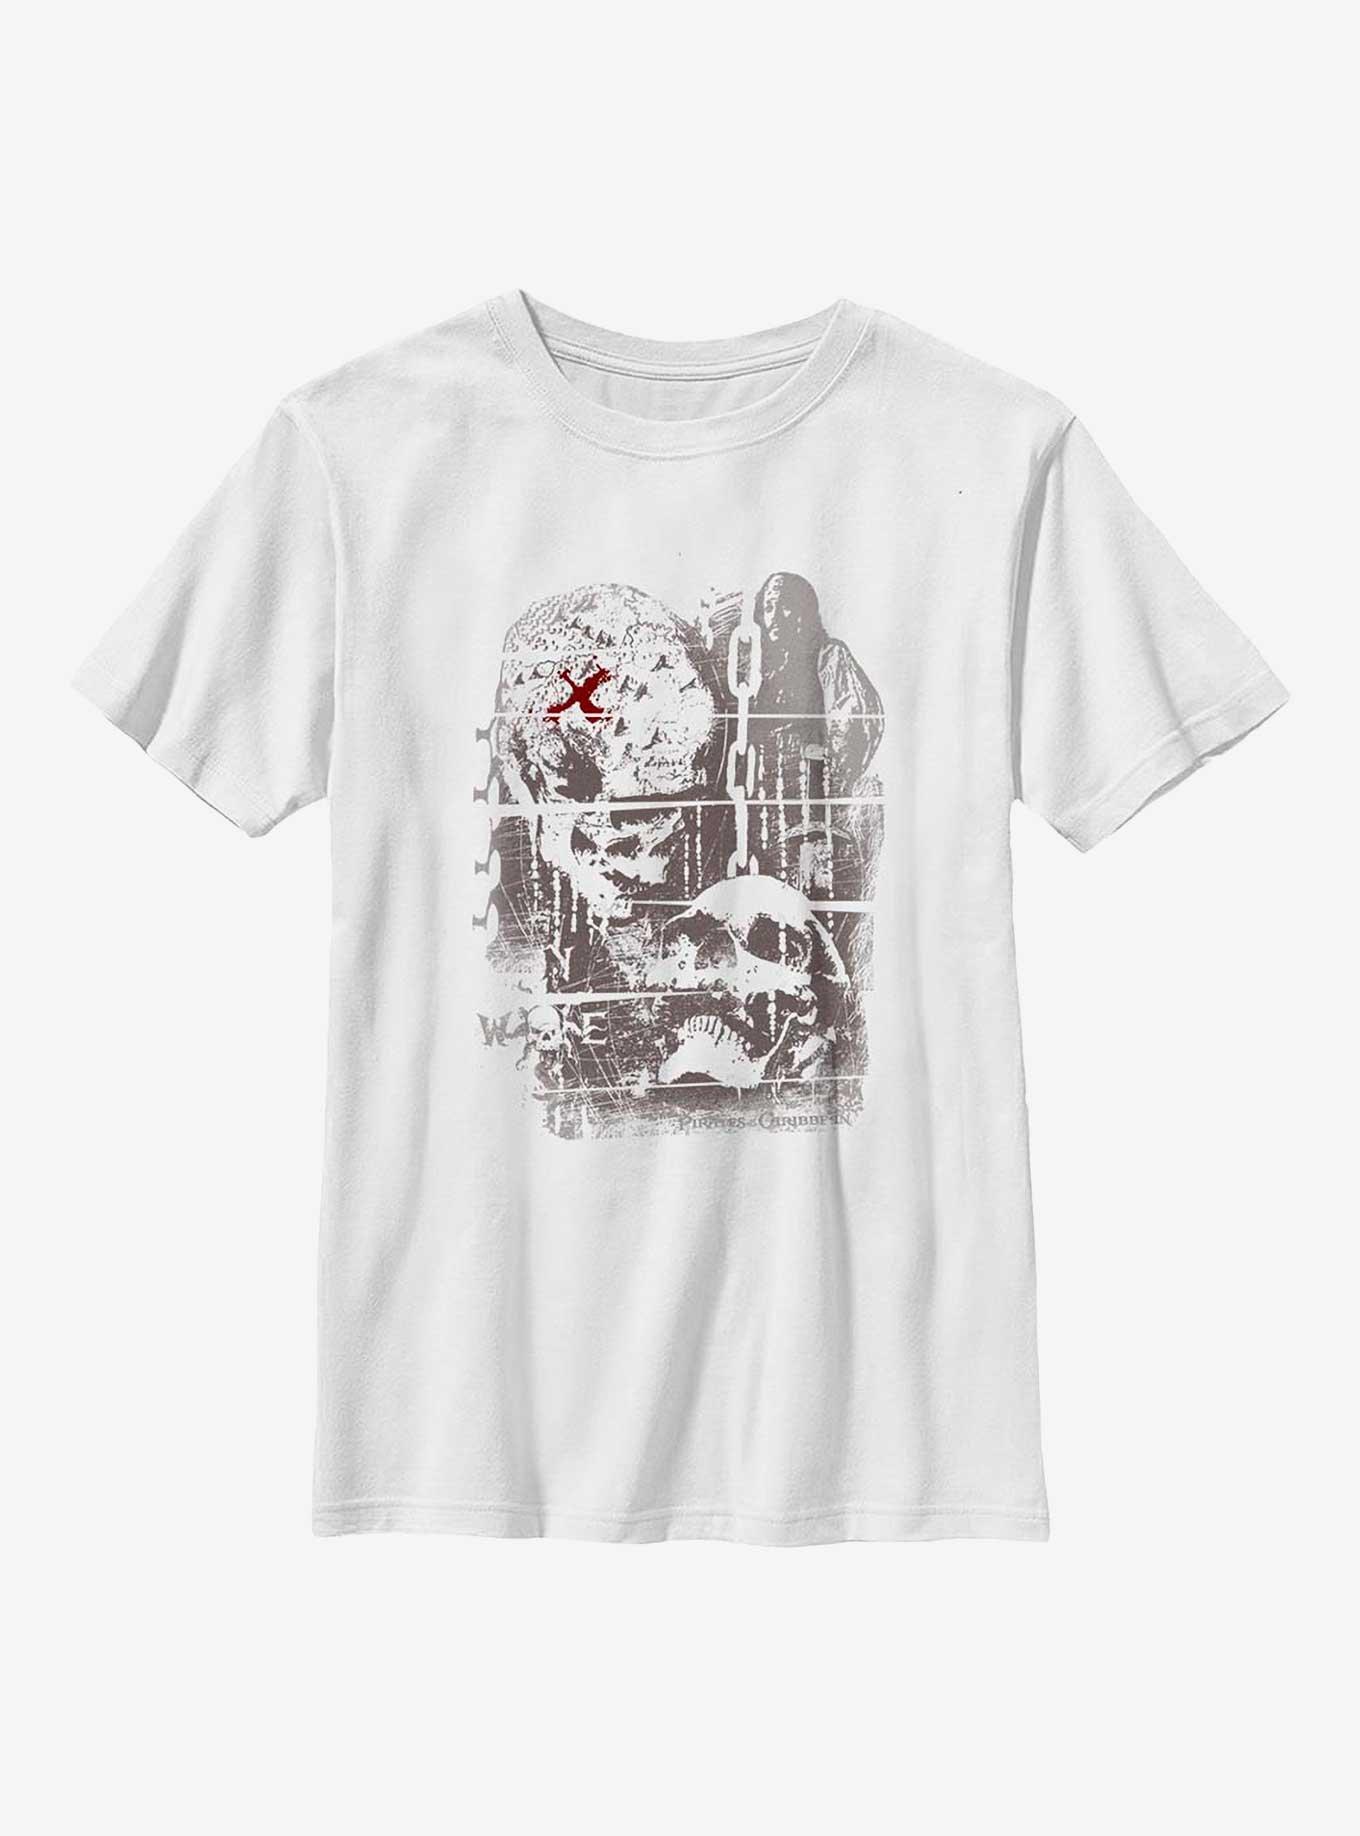 Disney Pirates Of The Caribbean Sorrows Path Youth T-Shirt, WHITE, hi-res